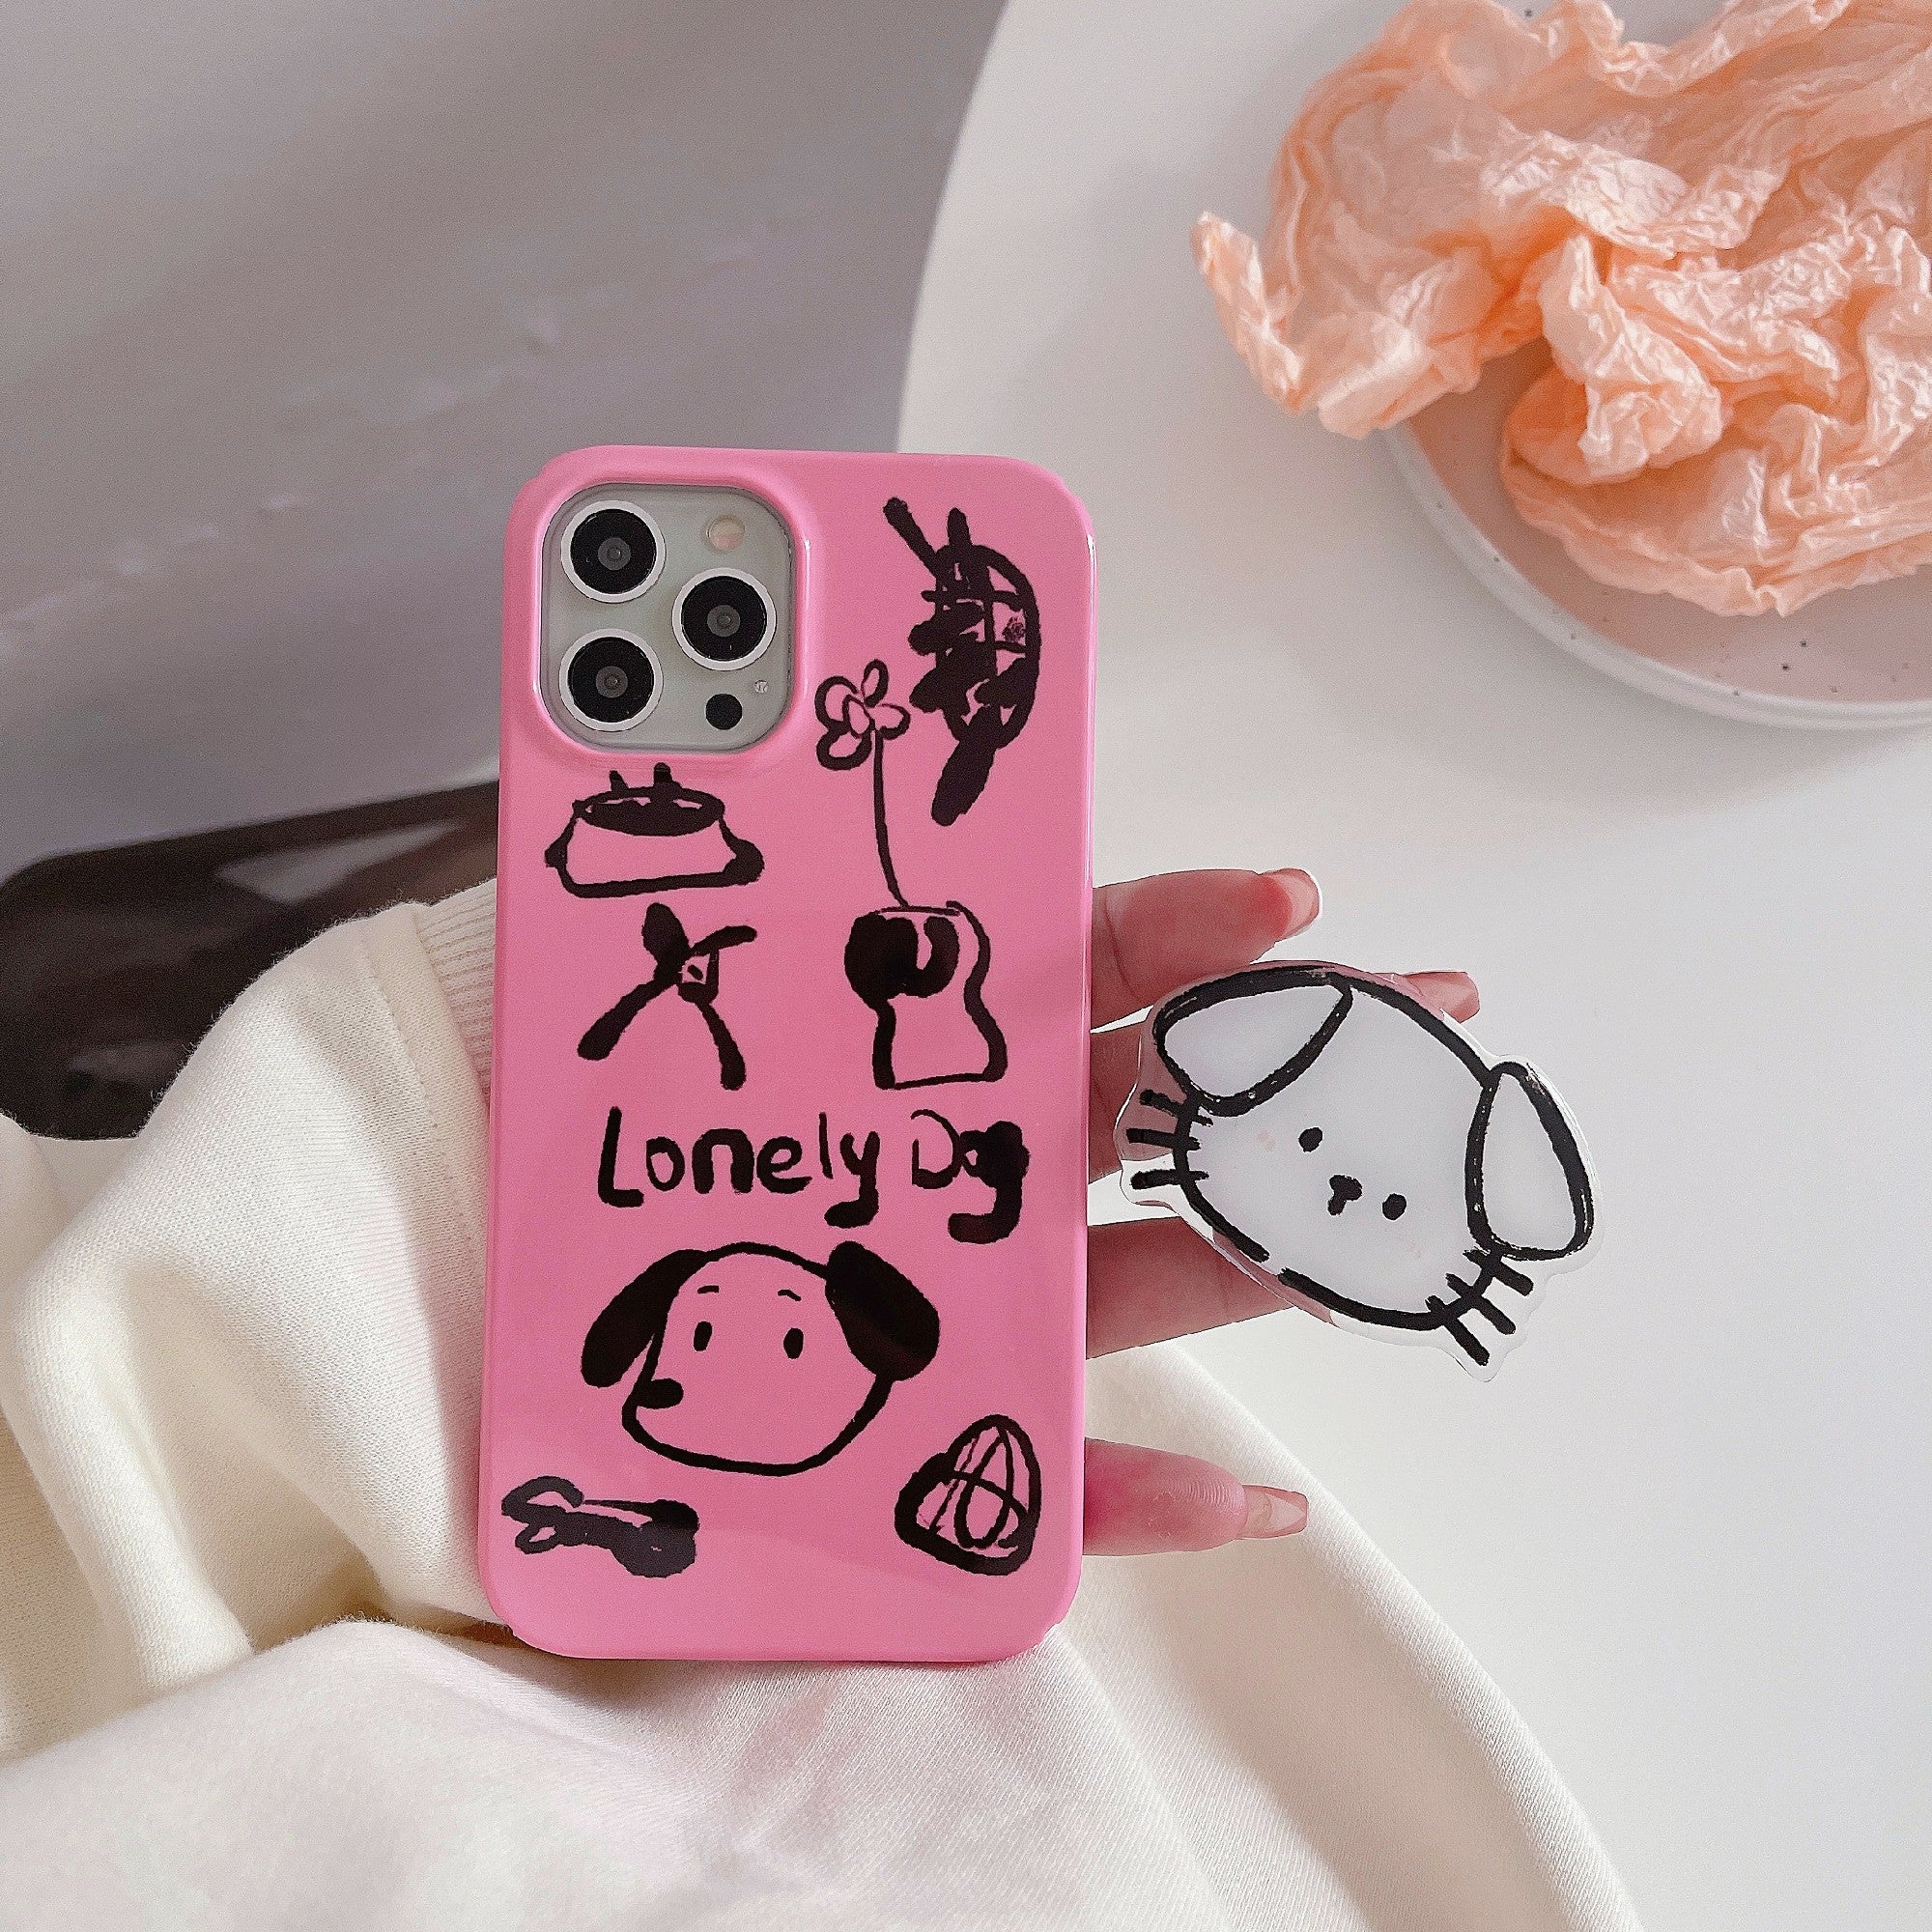 Uniqkart for iPhone 12 Pro Max 6.7 inch Hard PC Phone Case Pattern Printing Protective Glossy Phone Shell - Lonely Dog